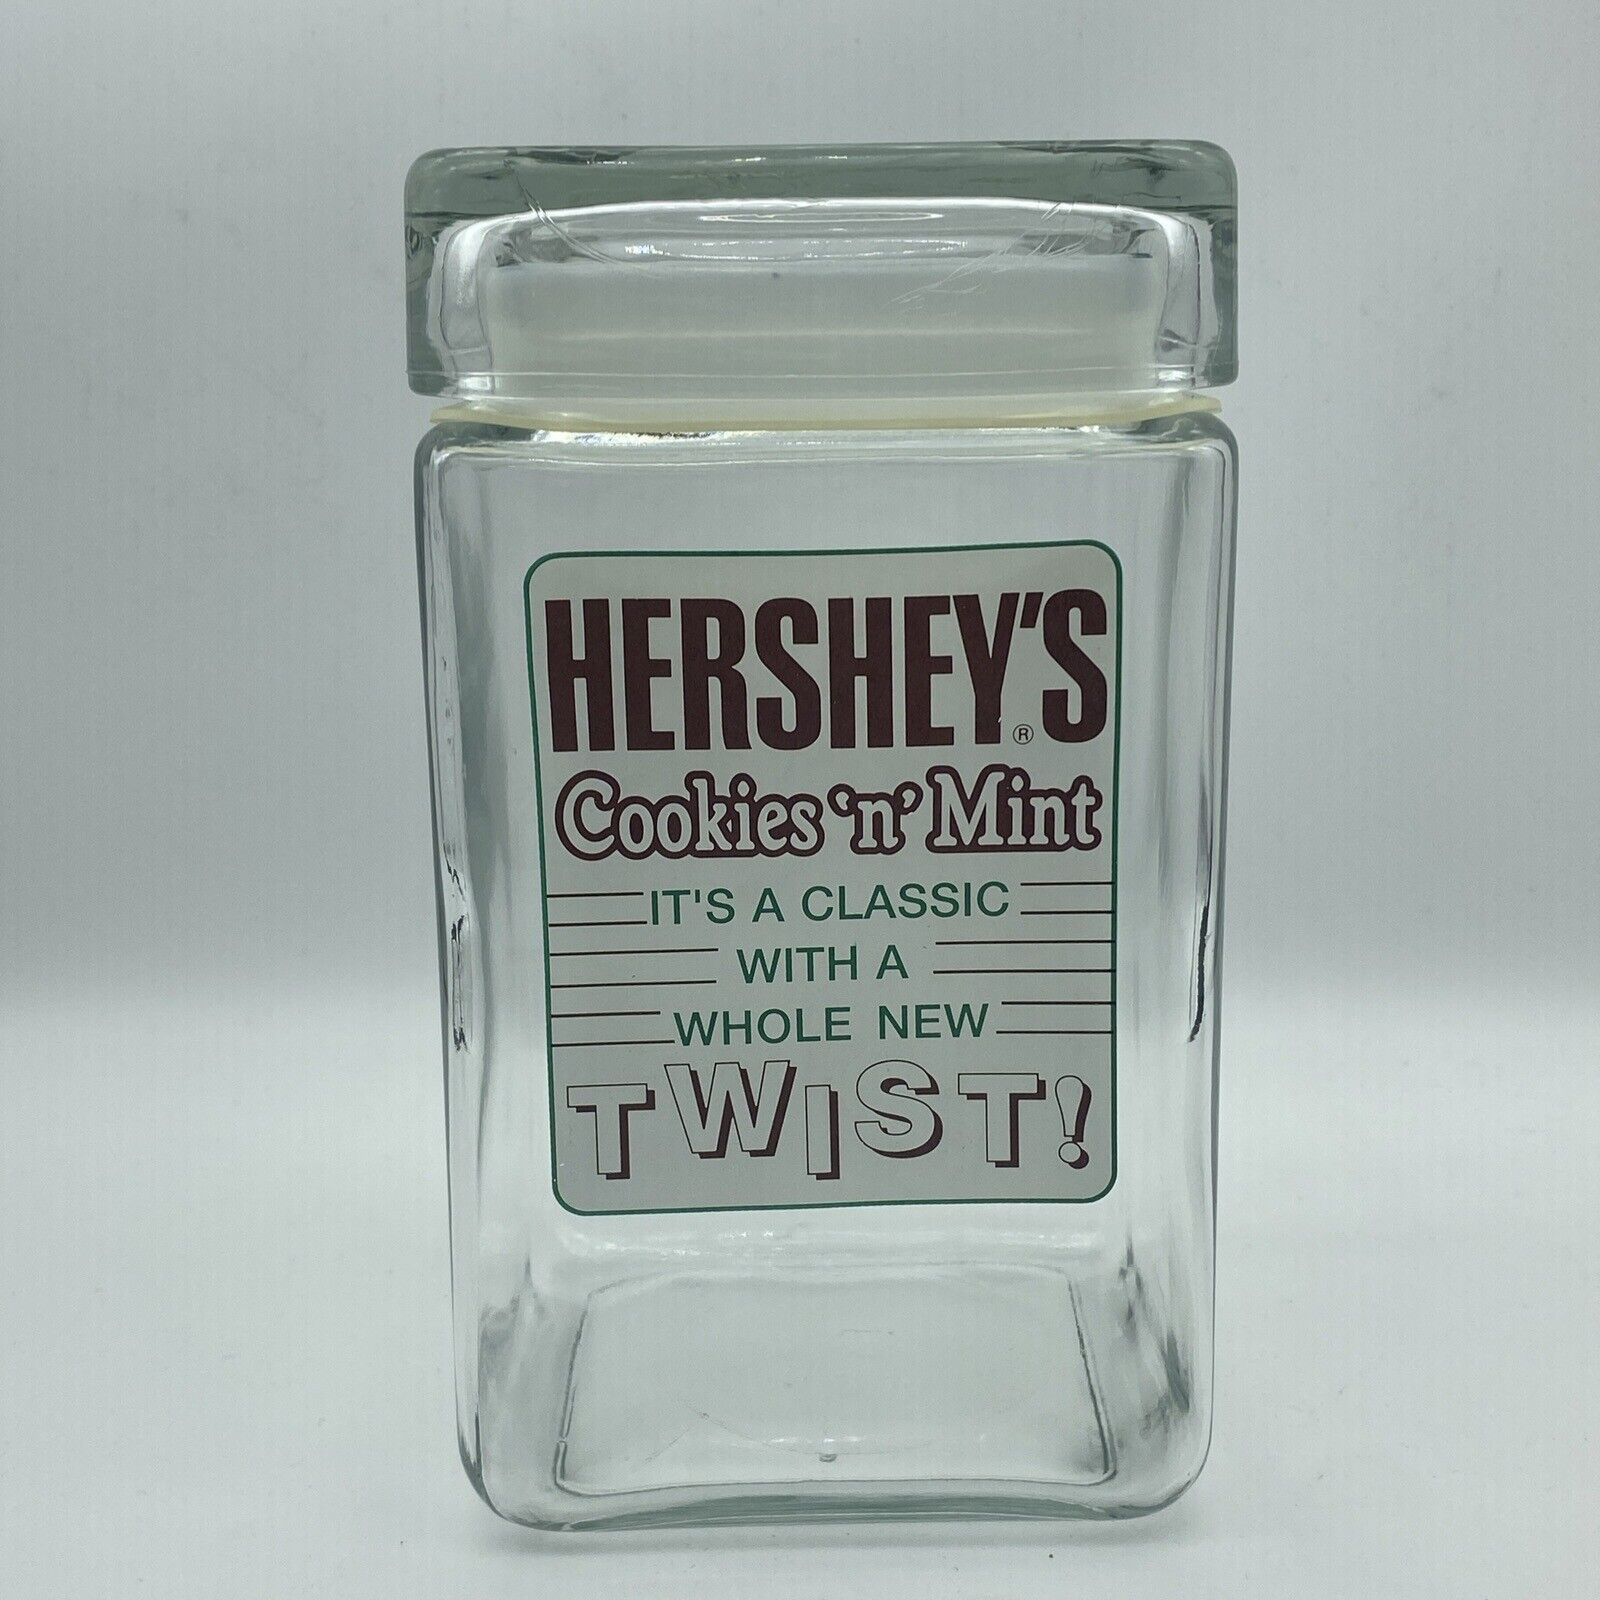 Hershey\'s Cookies \'n\' Mint Candy Bar Advertising Jar Canister Vintage 1990s T3